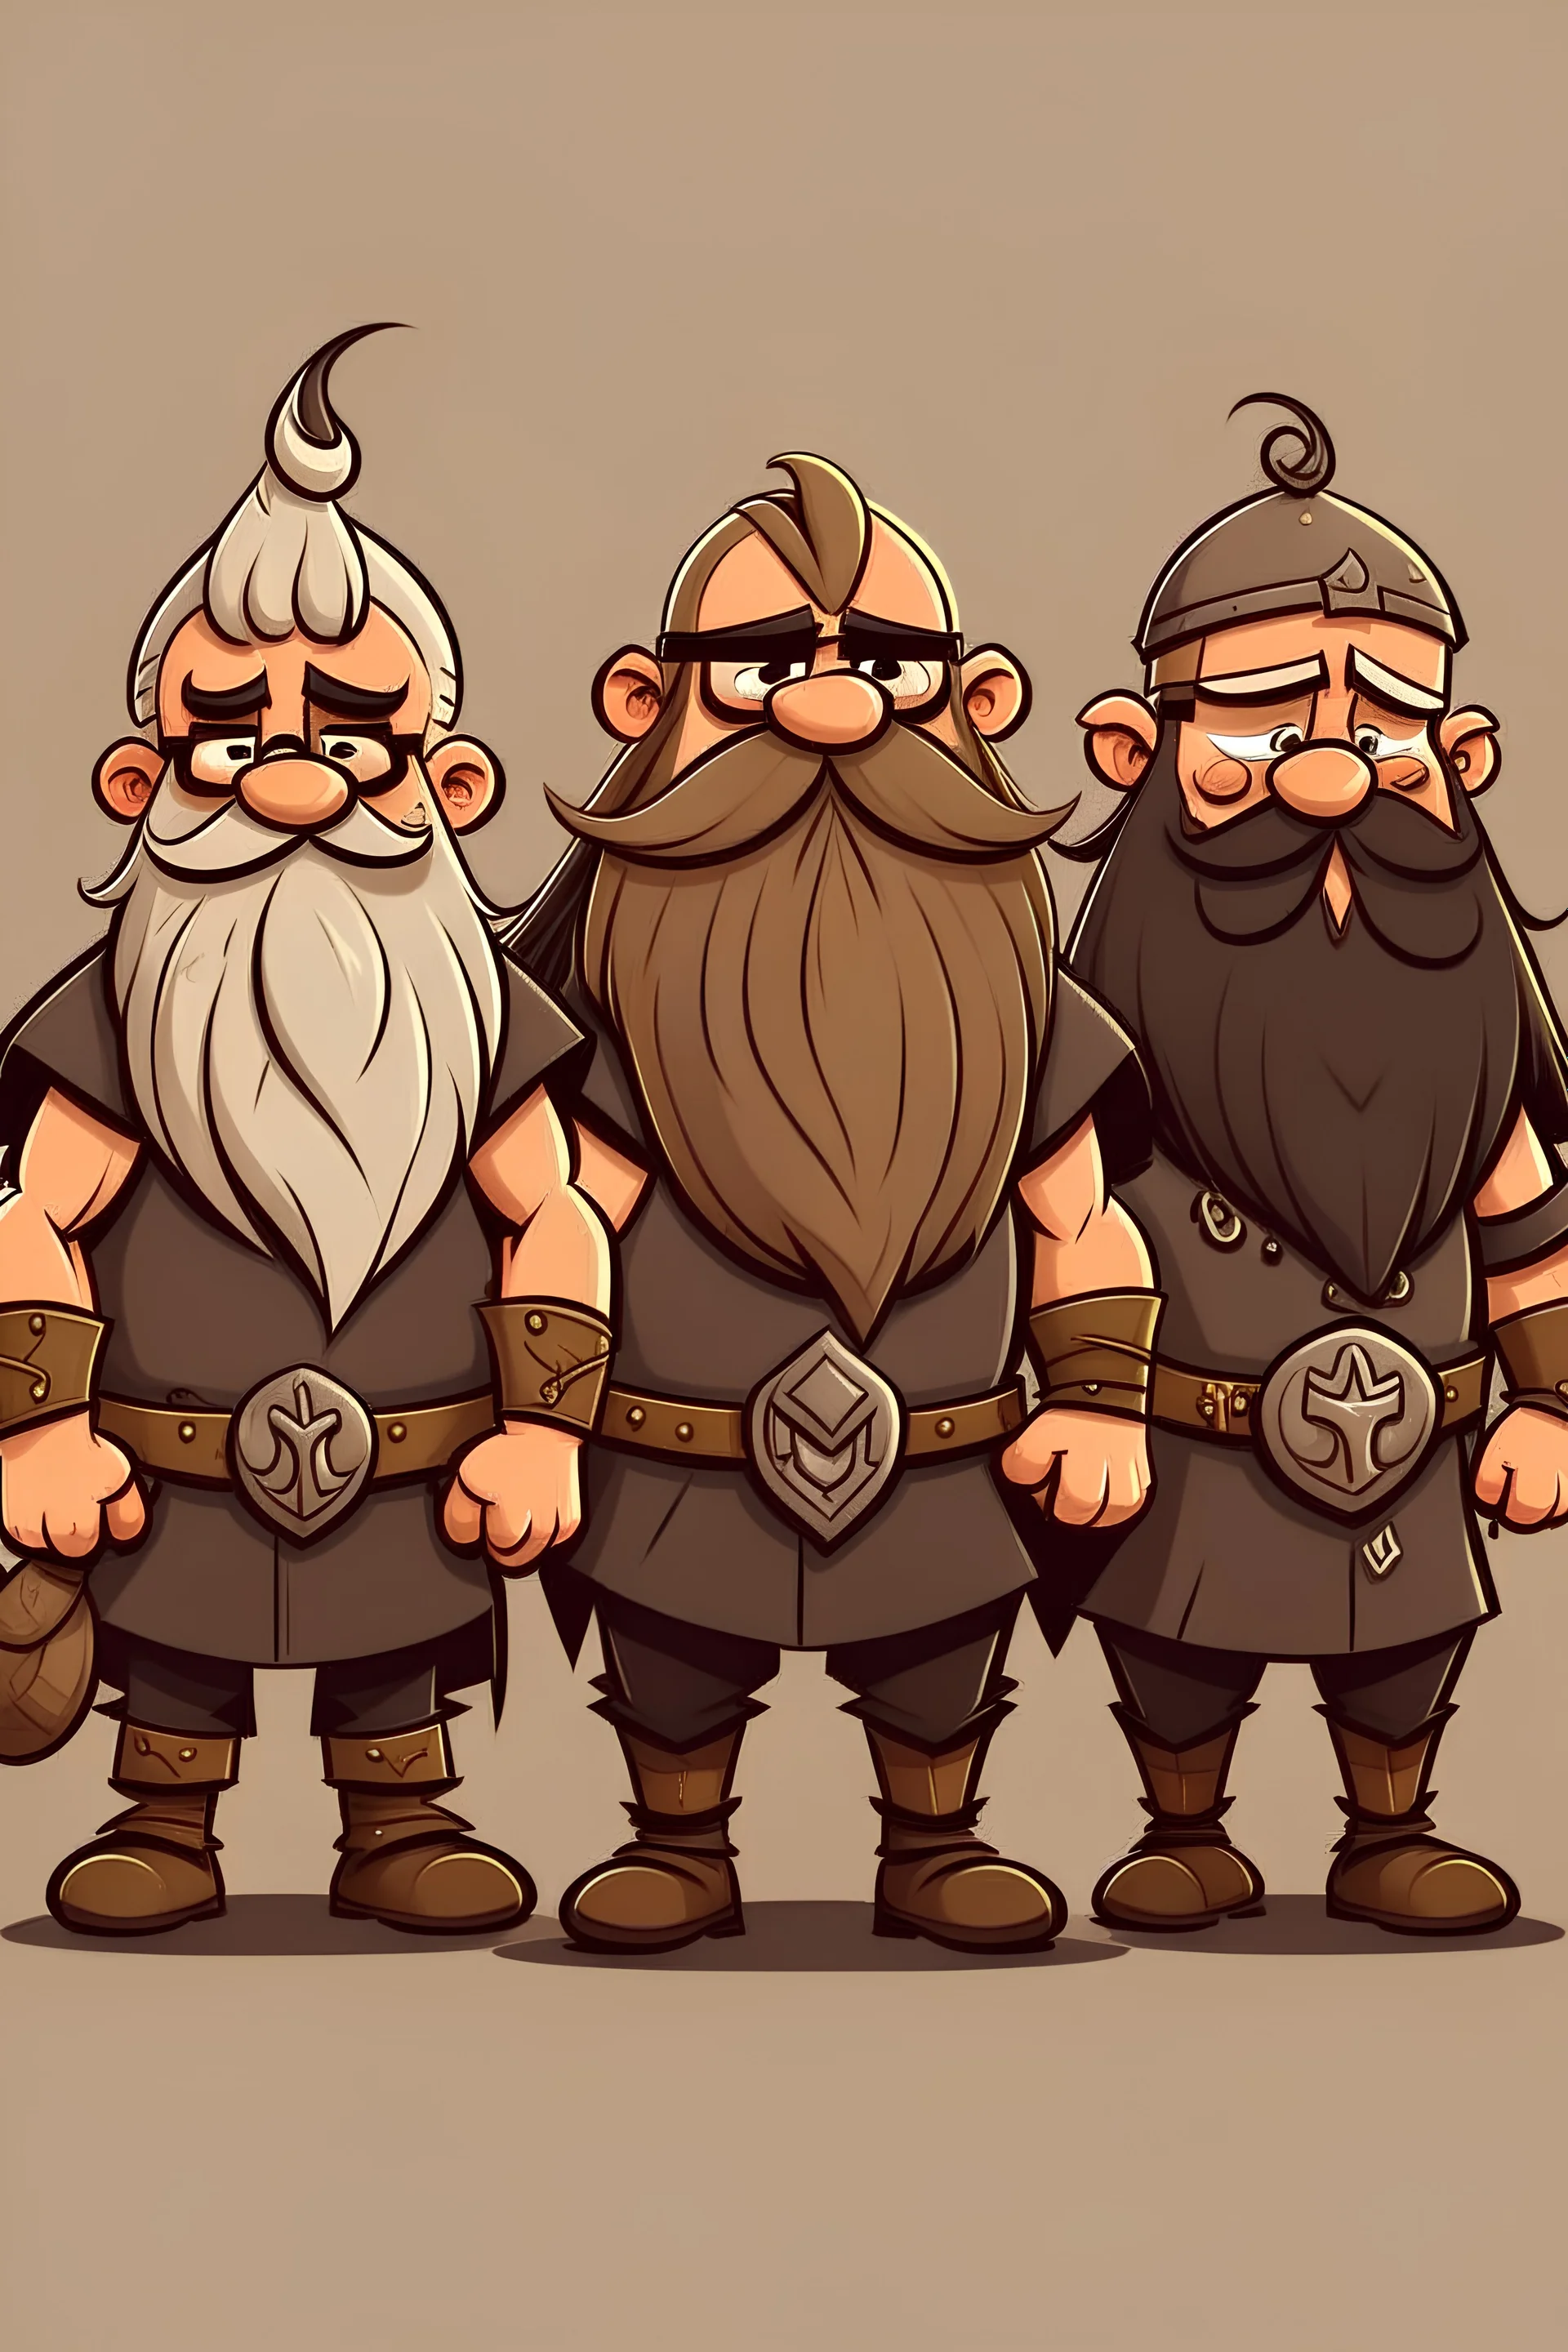 depict four vikings in a cartoonish style. 1st viking with a belly, glasses and beard, 2nd viking with black curly hair and glasses, 3rd viking with a bald head and scars 4th viking tall with big belly and long hair with a mustache